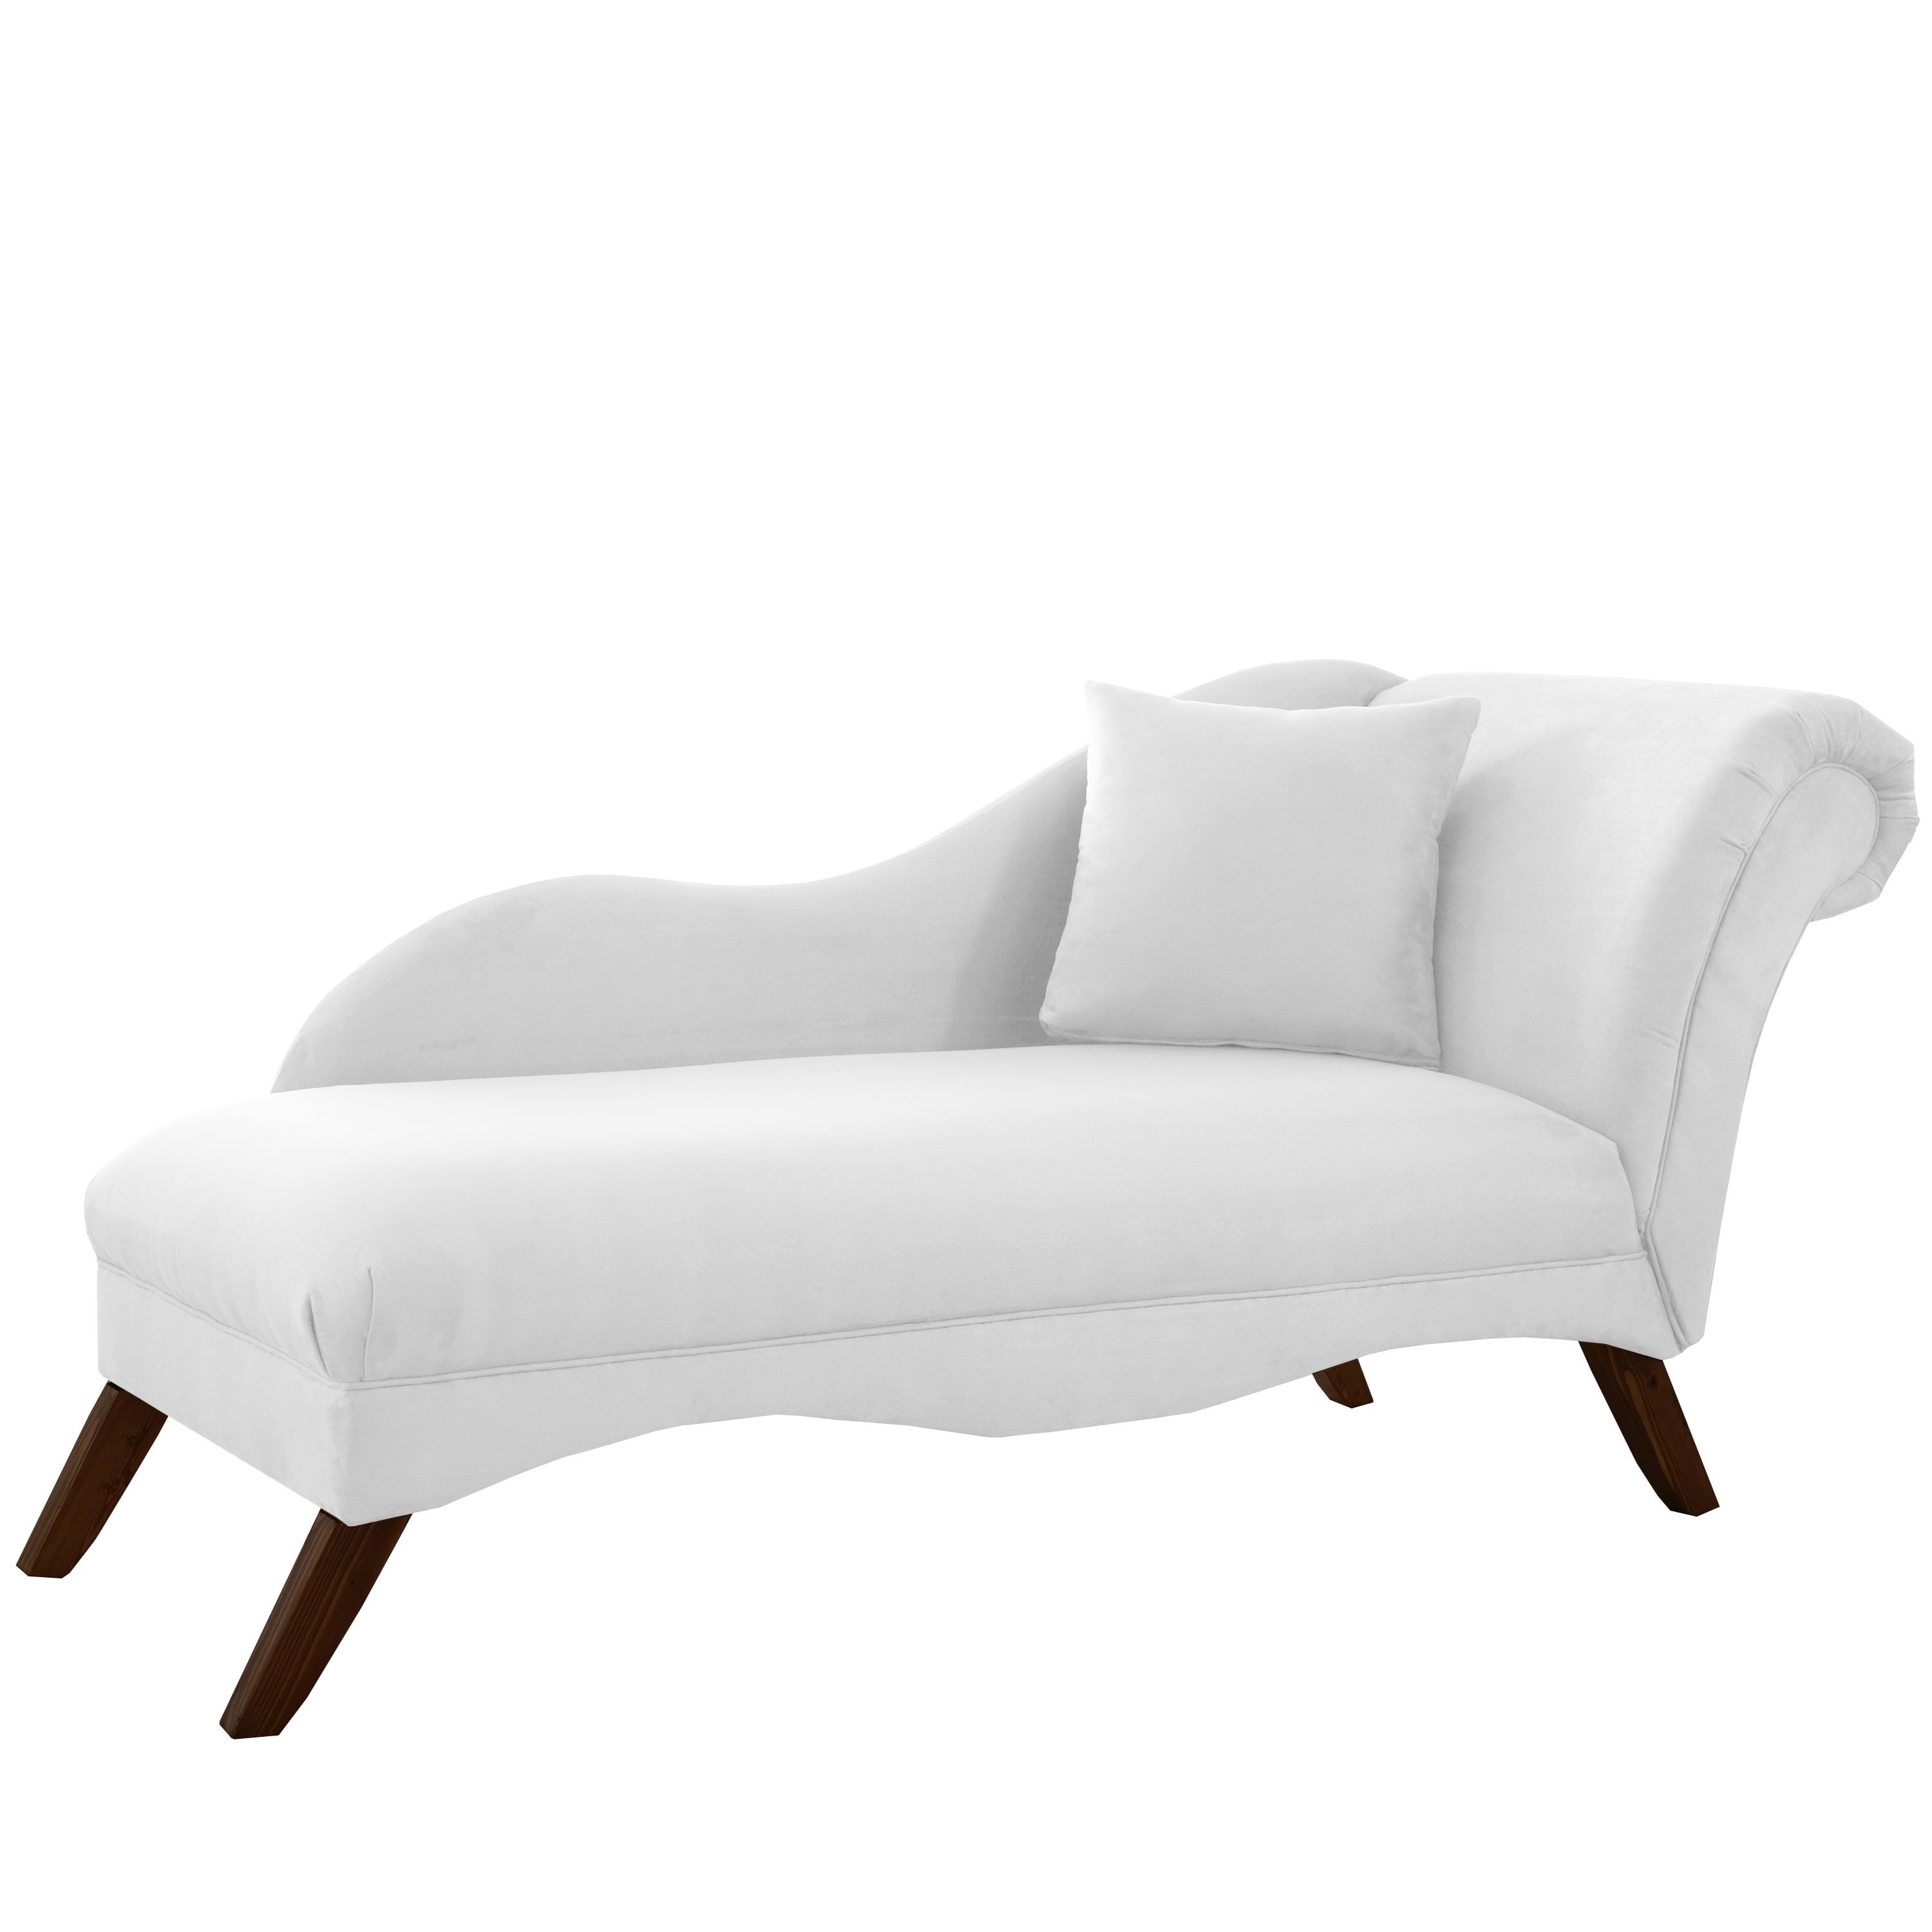 Velvet Chaise Lounges In Recent Skyline Furniture Chaise Lounge In Velvet White – Free Shipping (View 14 of 15)